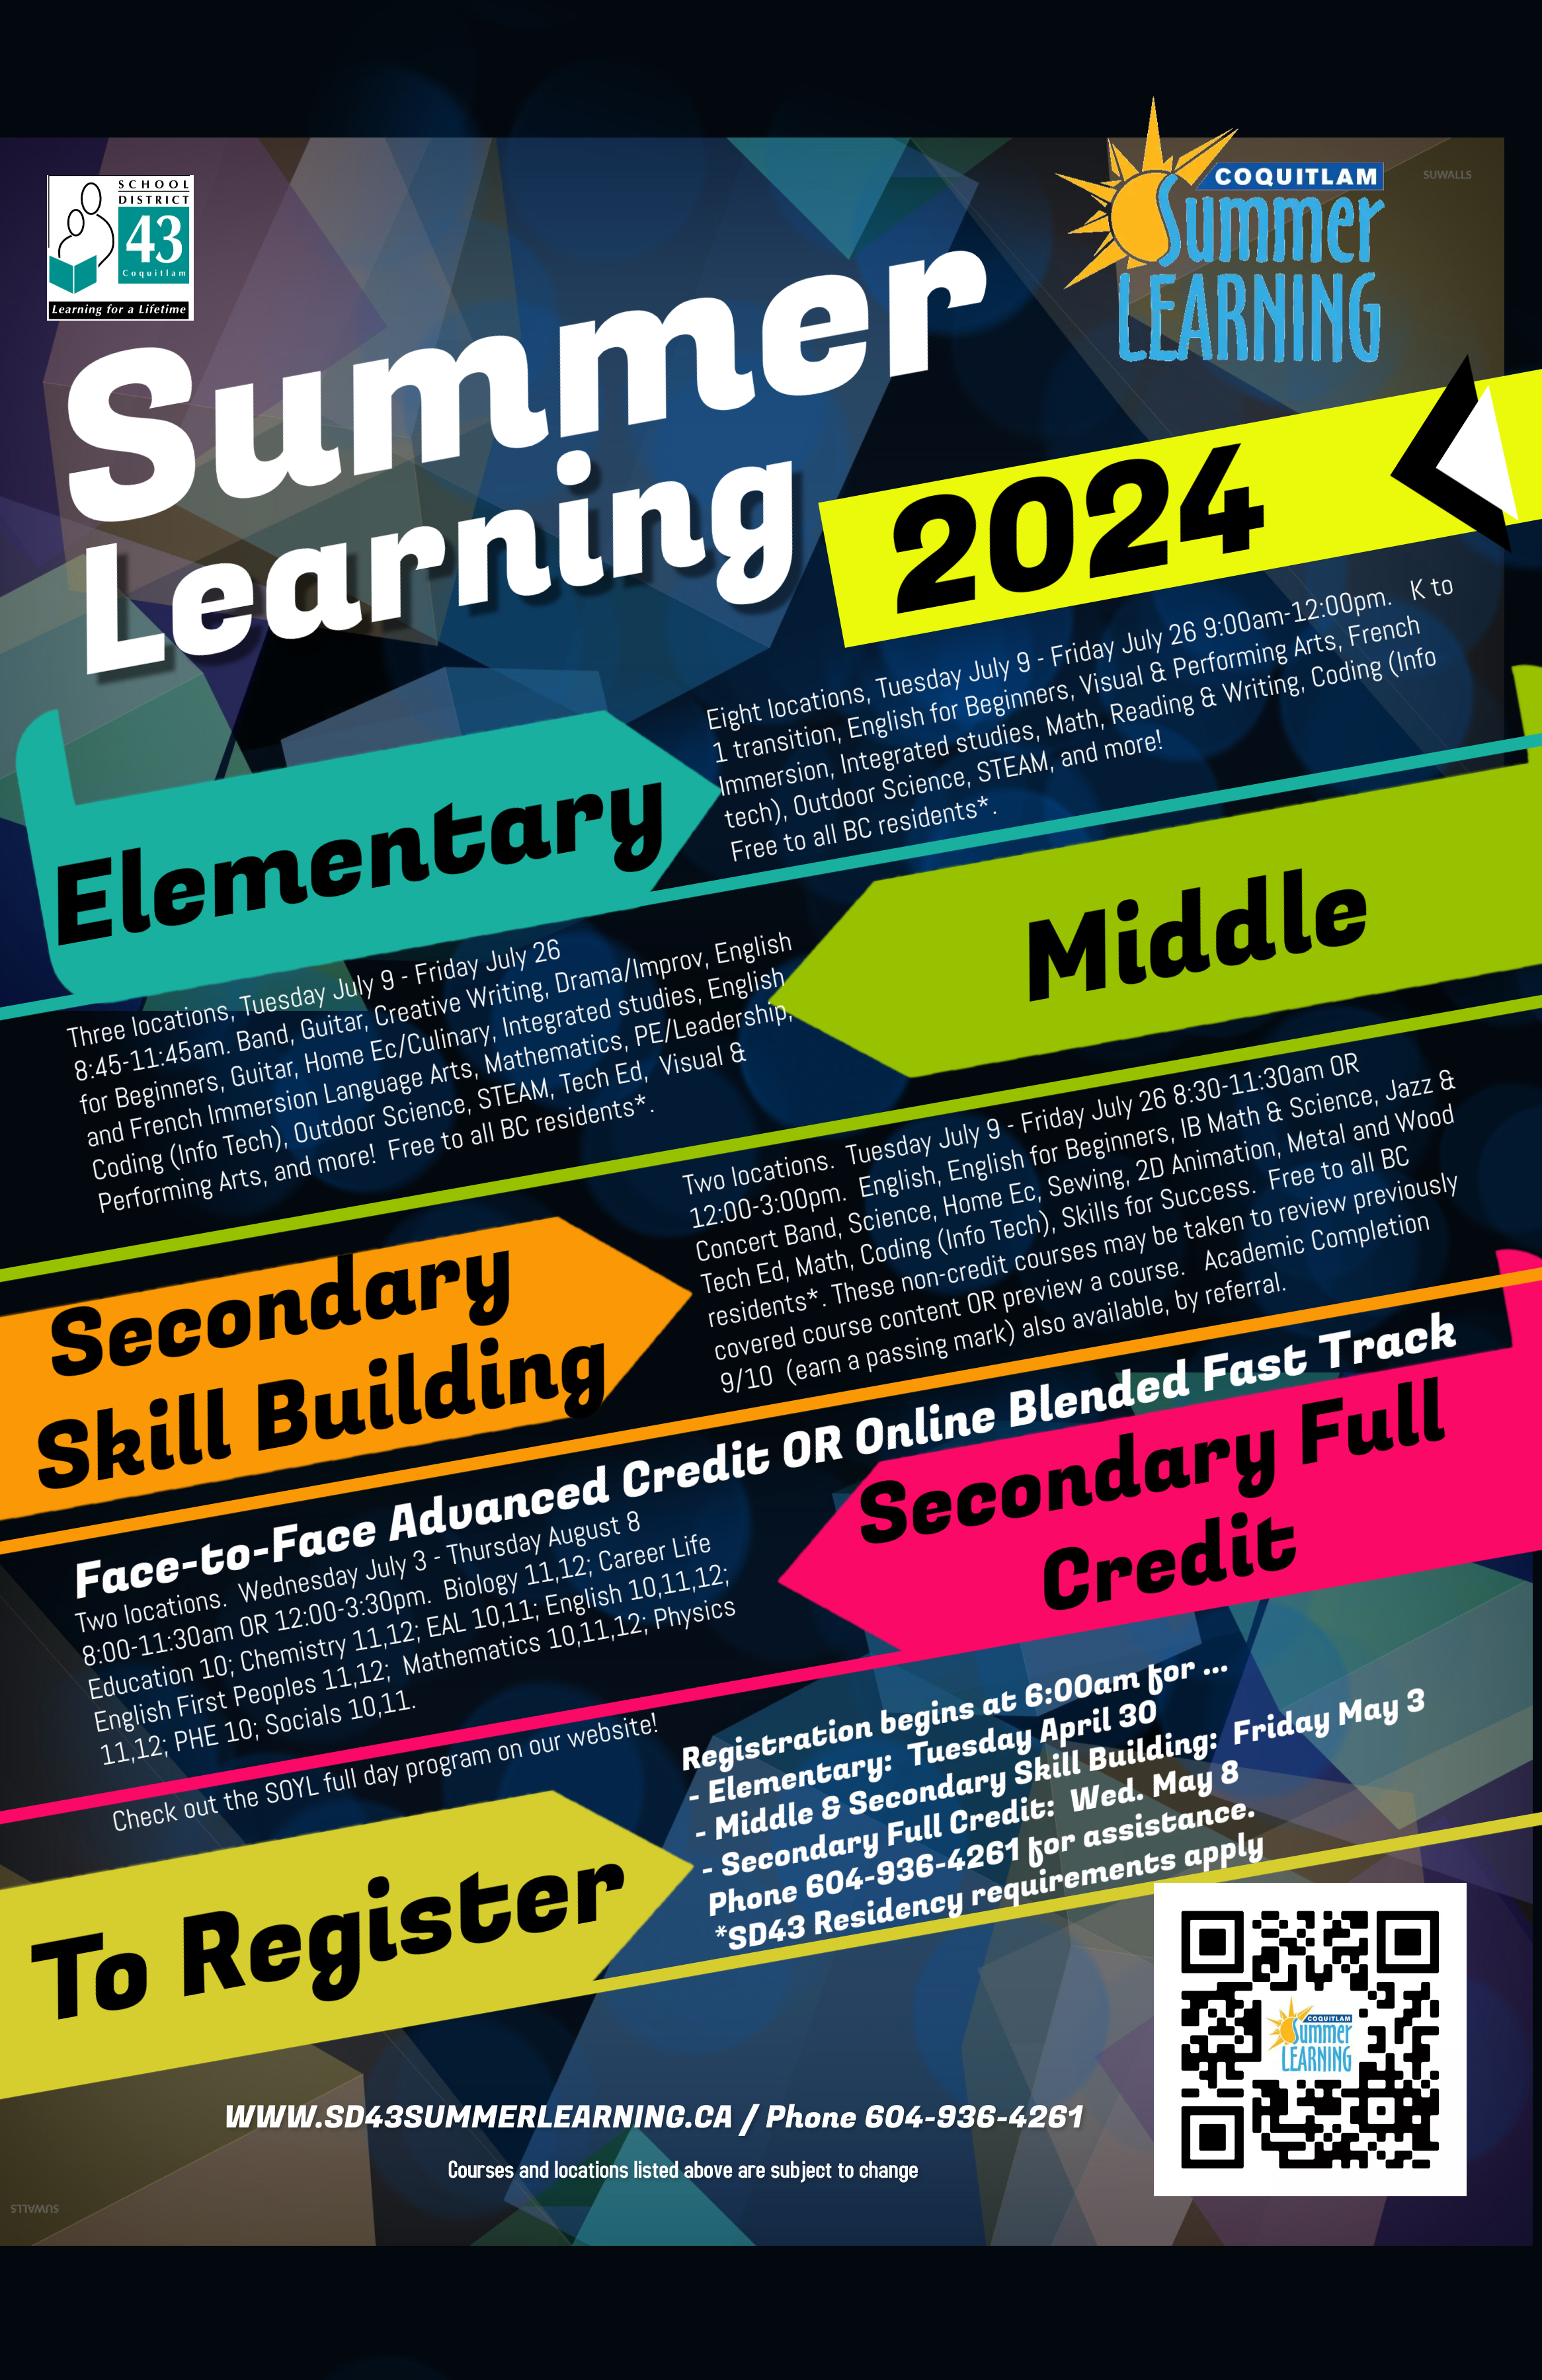 Please see attached poster for 2024 Summer Learning opportunities